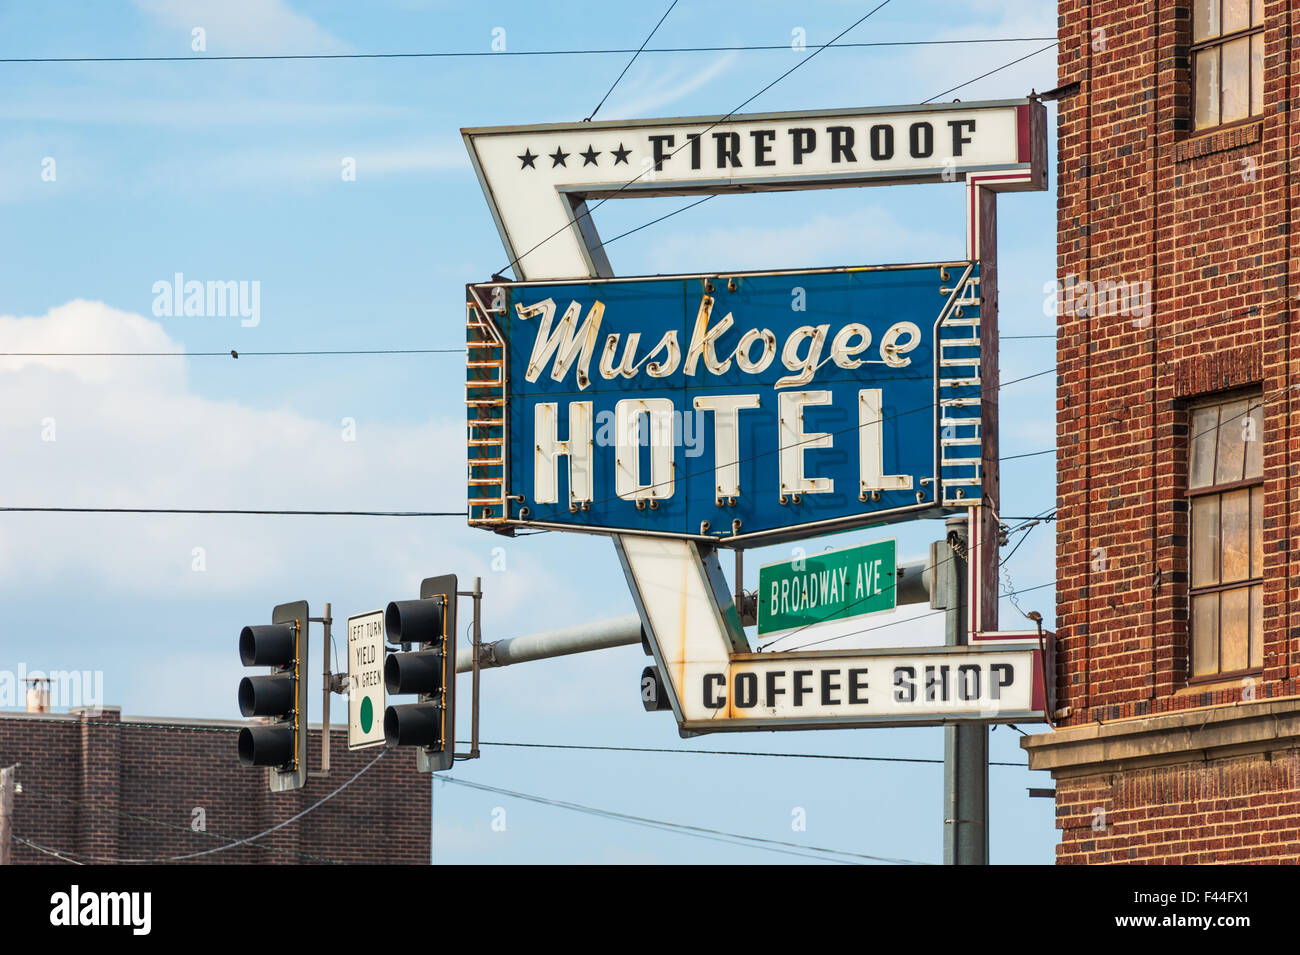 Fireproof Hotel High Resolution Stock Photography And Images - Alamy